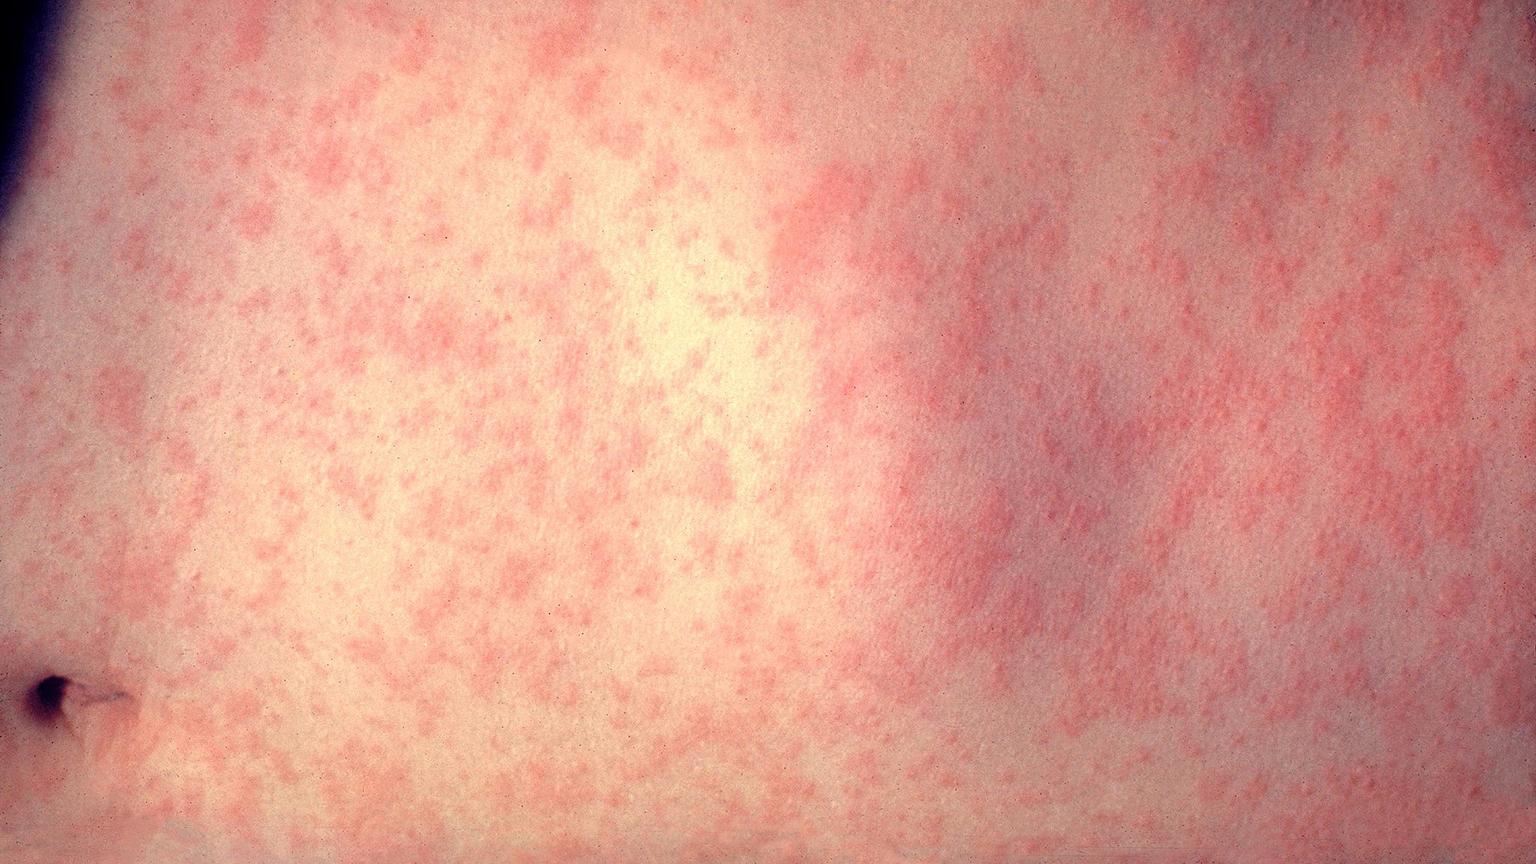 The skin of a patient three days after developing a measles infection. (Dr. Heinz F. Eichenwald / Centers for Disease Control and Prevention)